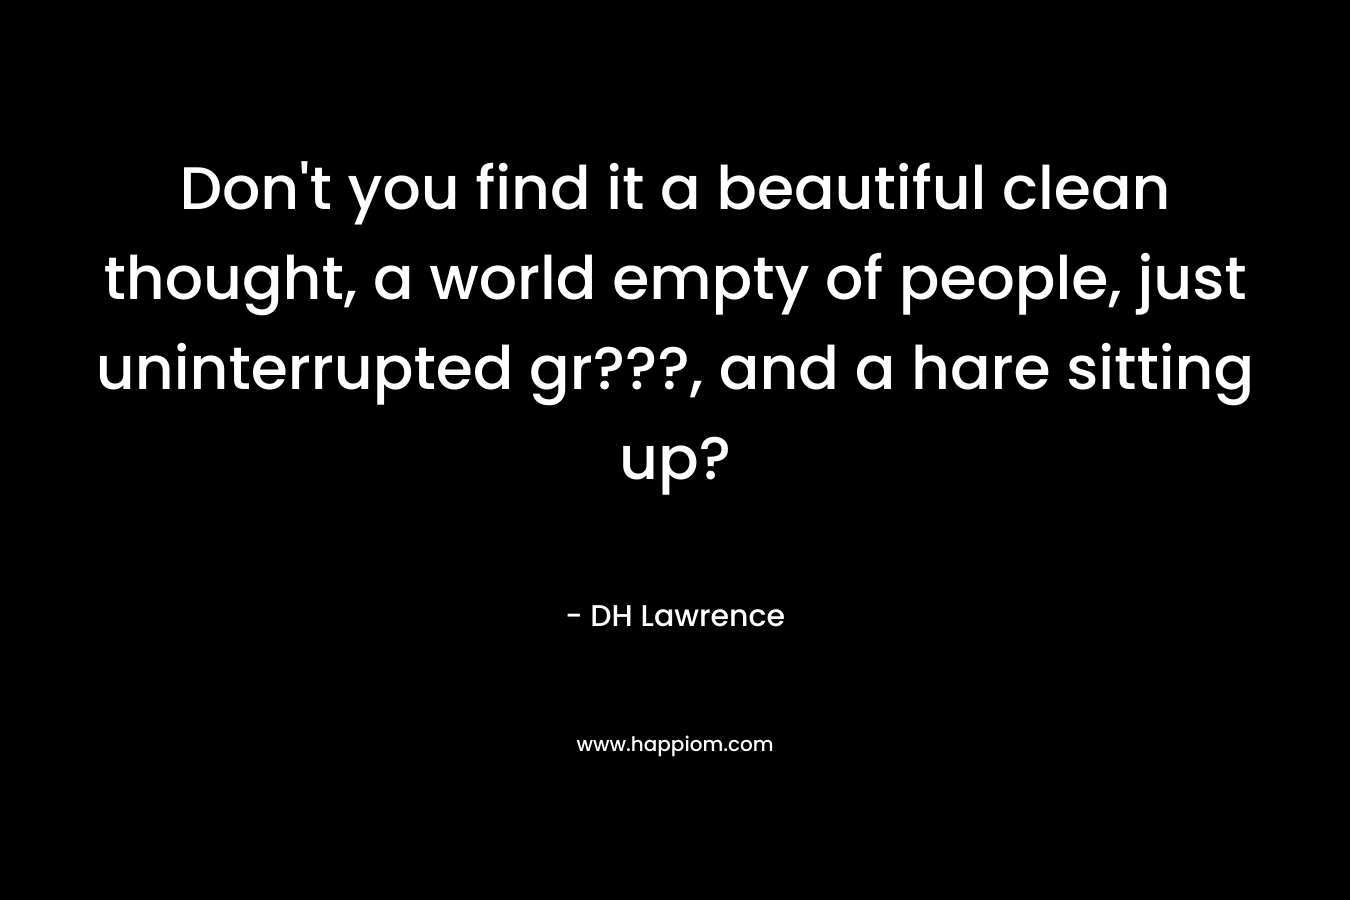 Don’t you find it a beautiful clean thought, a world empty of people, just uninterrupted gr???, and a hare sitting up? – DH Lawrence